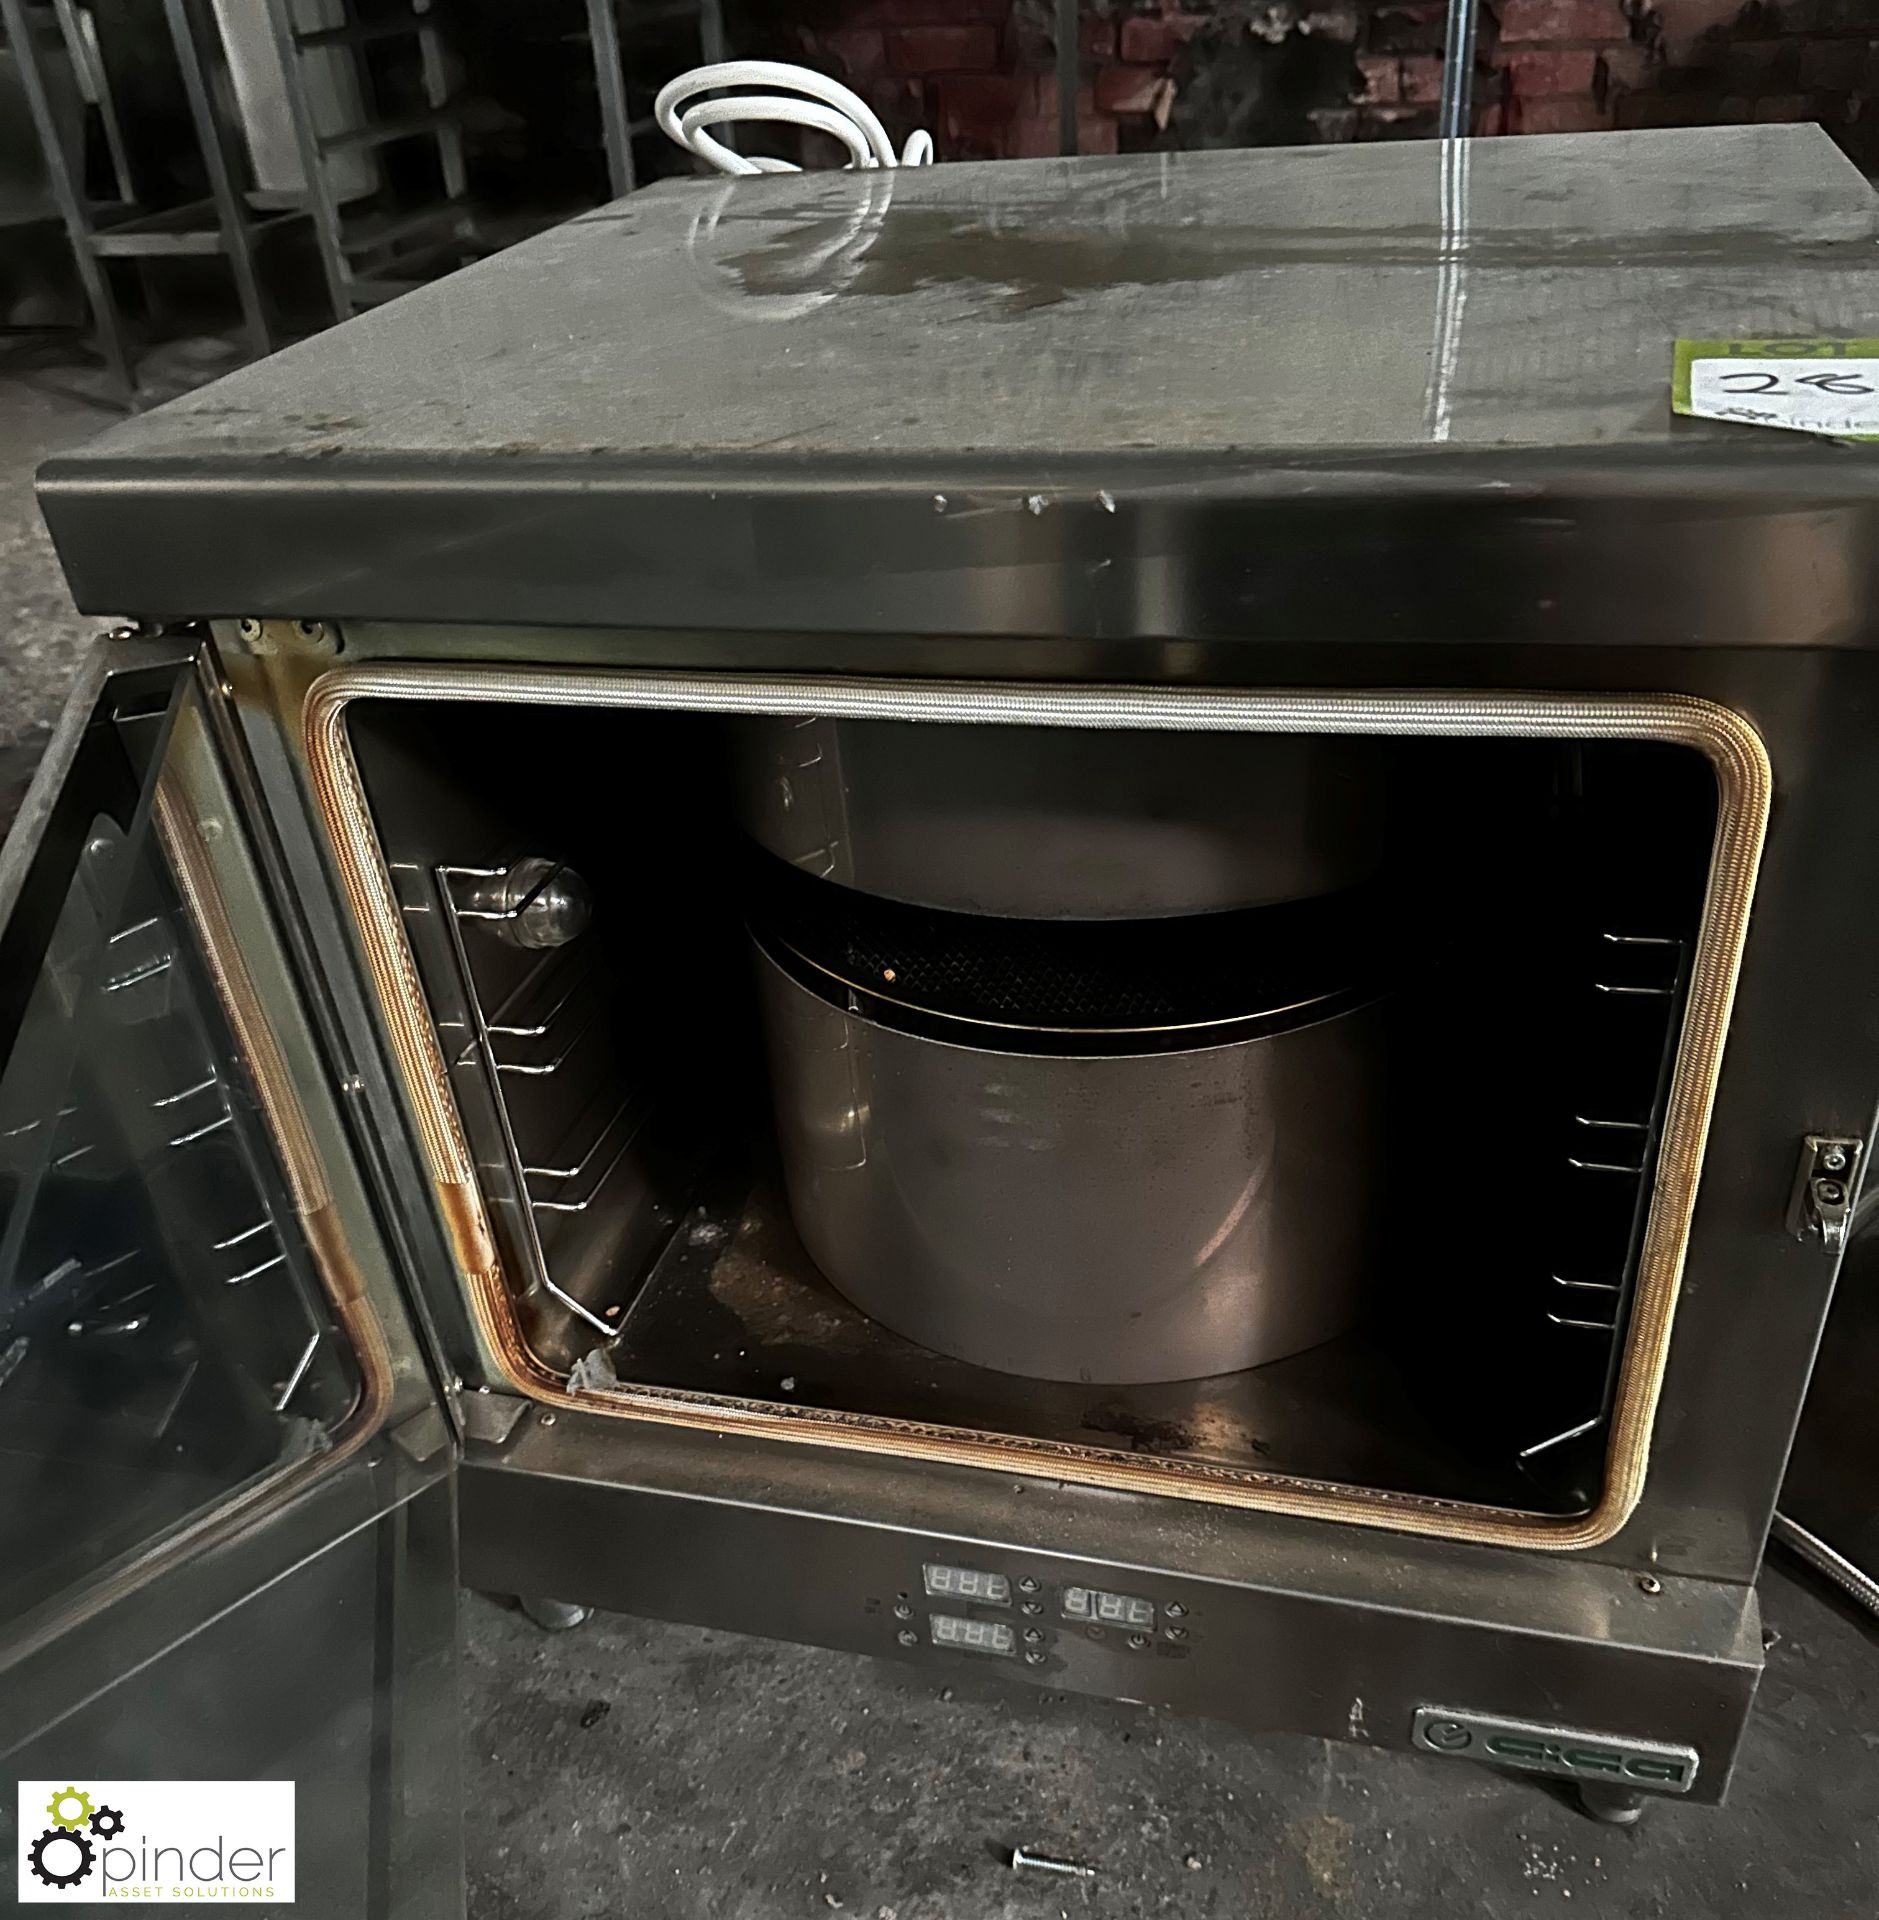 Cica stainless steel 3-tray Oven, 240volts - Image 2 of 5